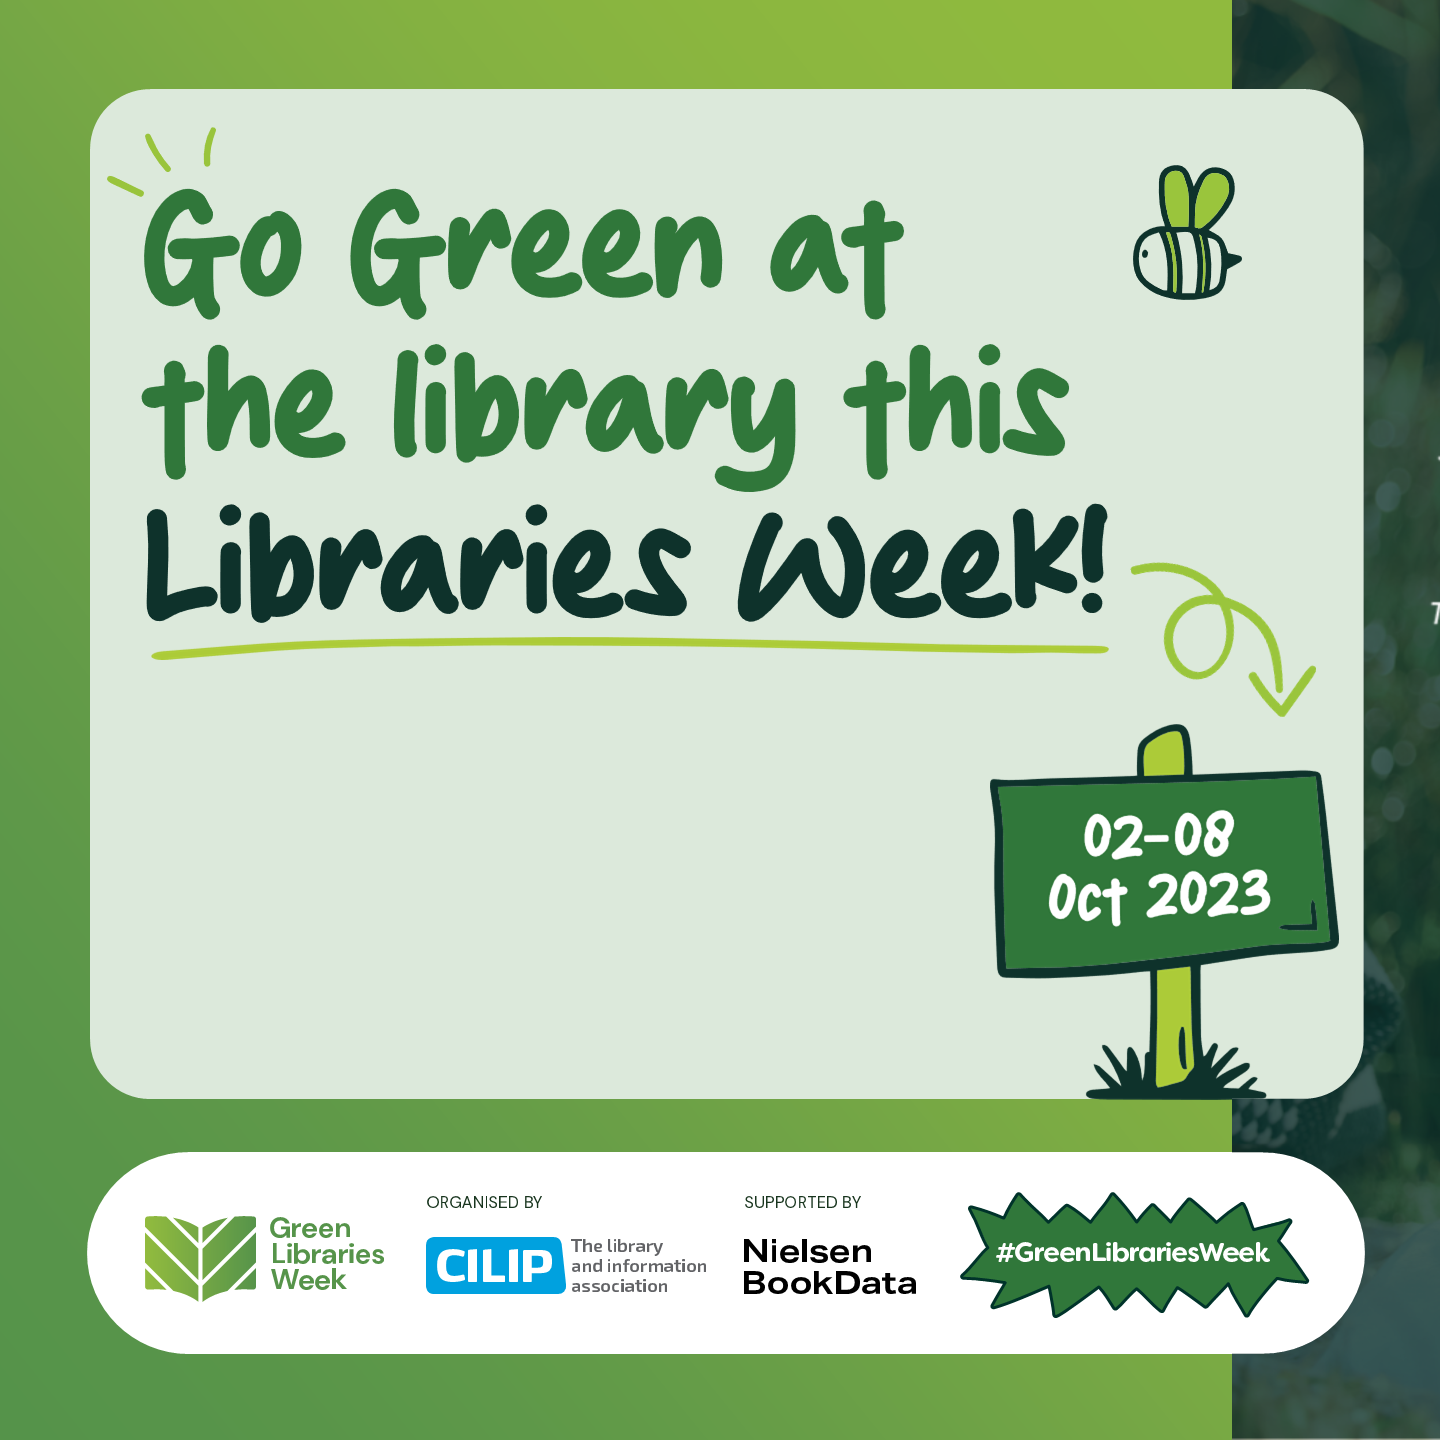 Go green at the library this libraries week. 02-08 October 2023